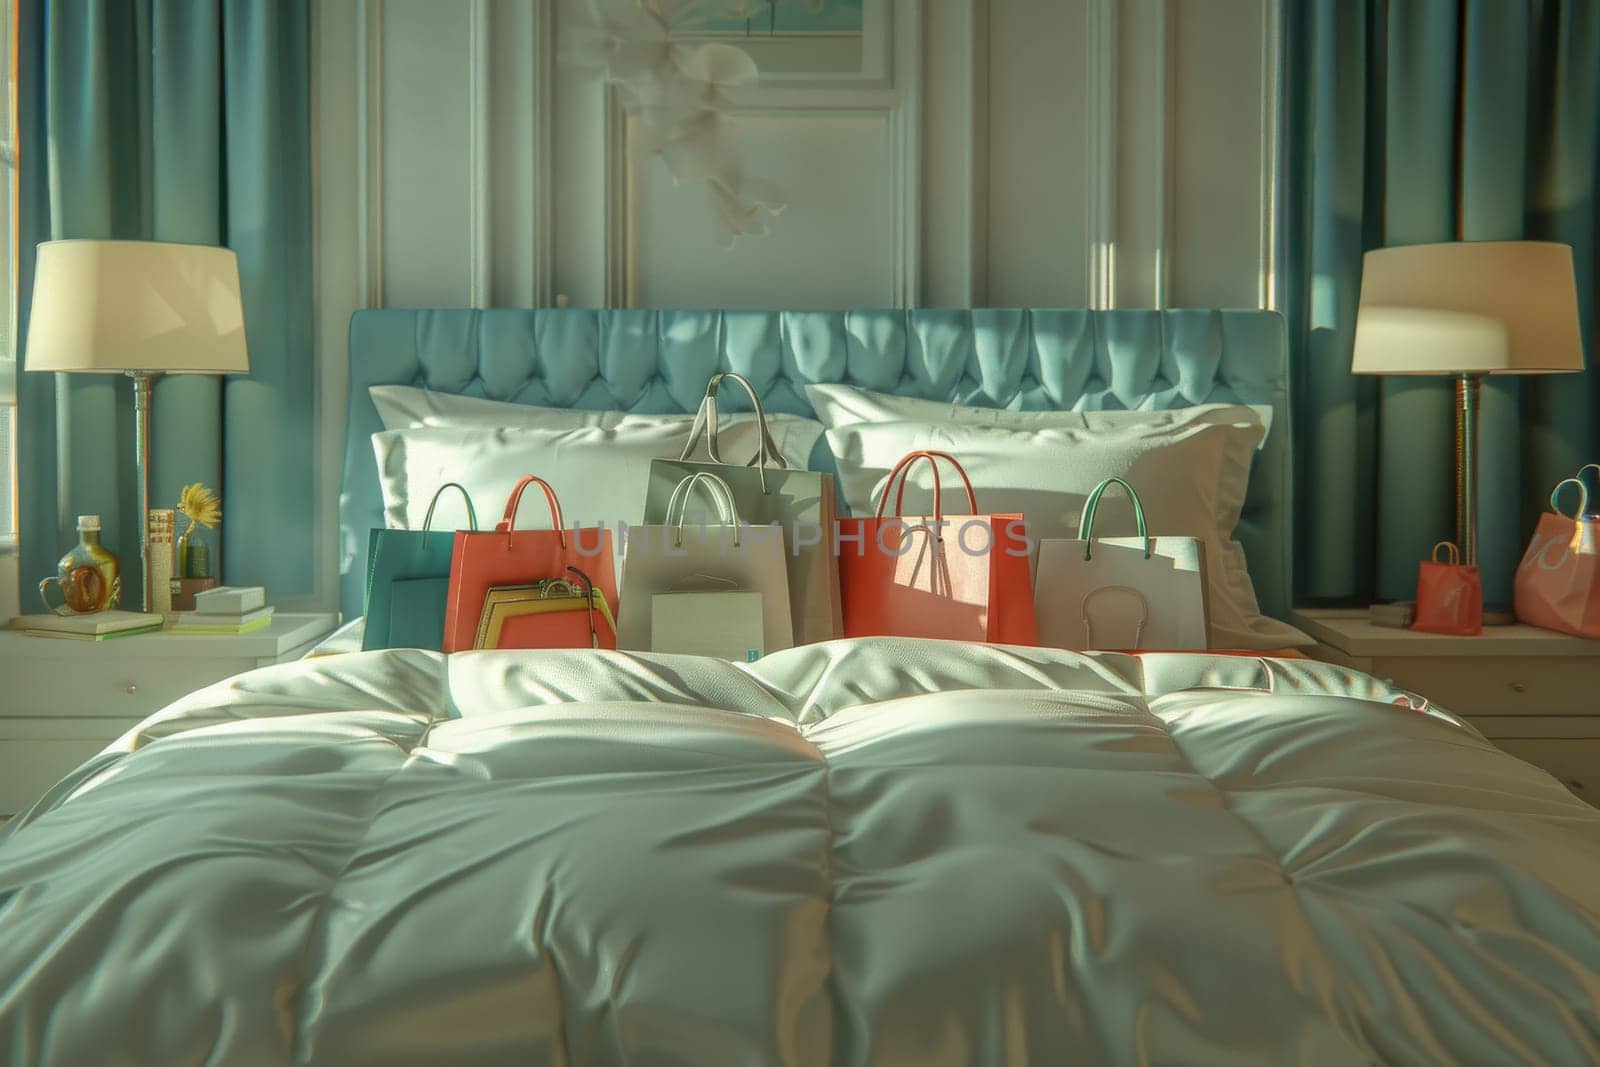 Many Shopping bag on hotel bed. shopping concept.